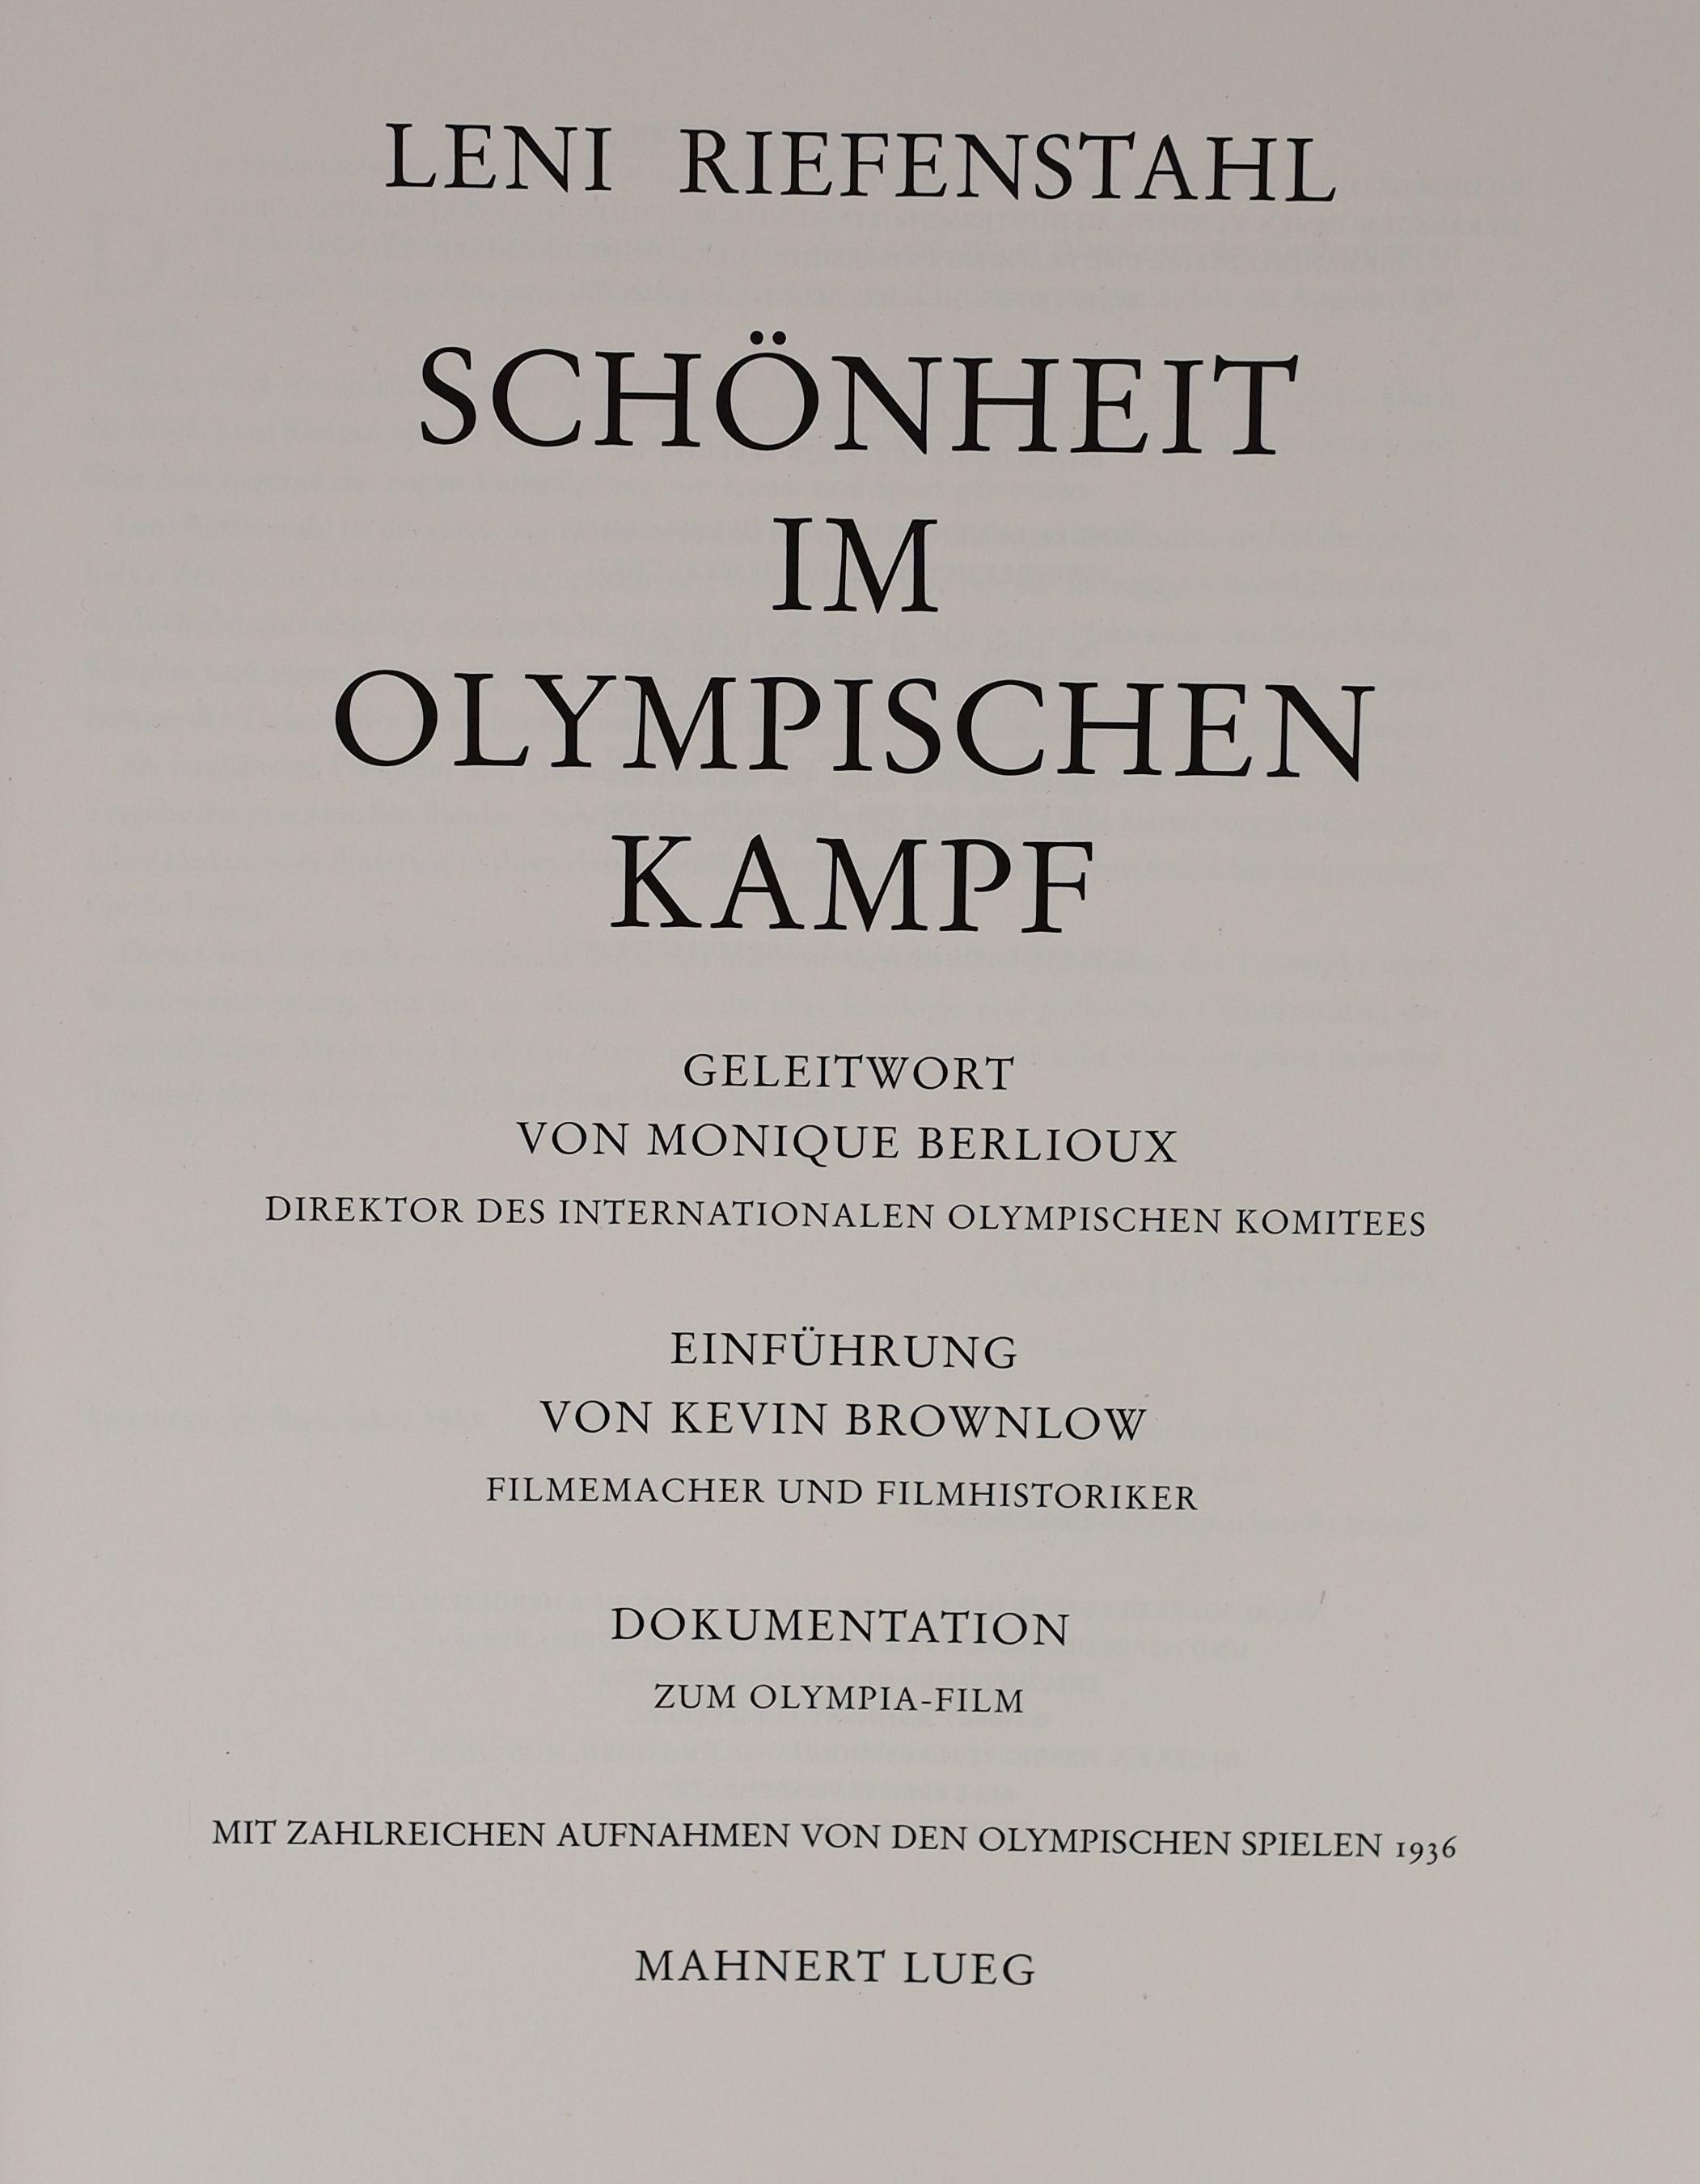 Riefenstahl, Leni - Schönheit im Olympischen Kampf. Complete with numerous text illustrations. Original cloth with gilt letters direct on upper and spine and original pictorial d/j. Folio. Mahnert Lueg, Munich, 1988. Wit